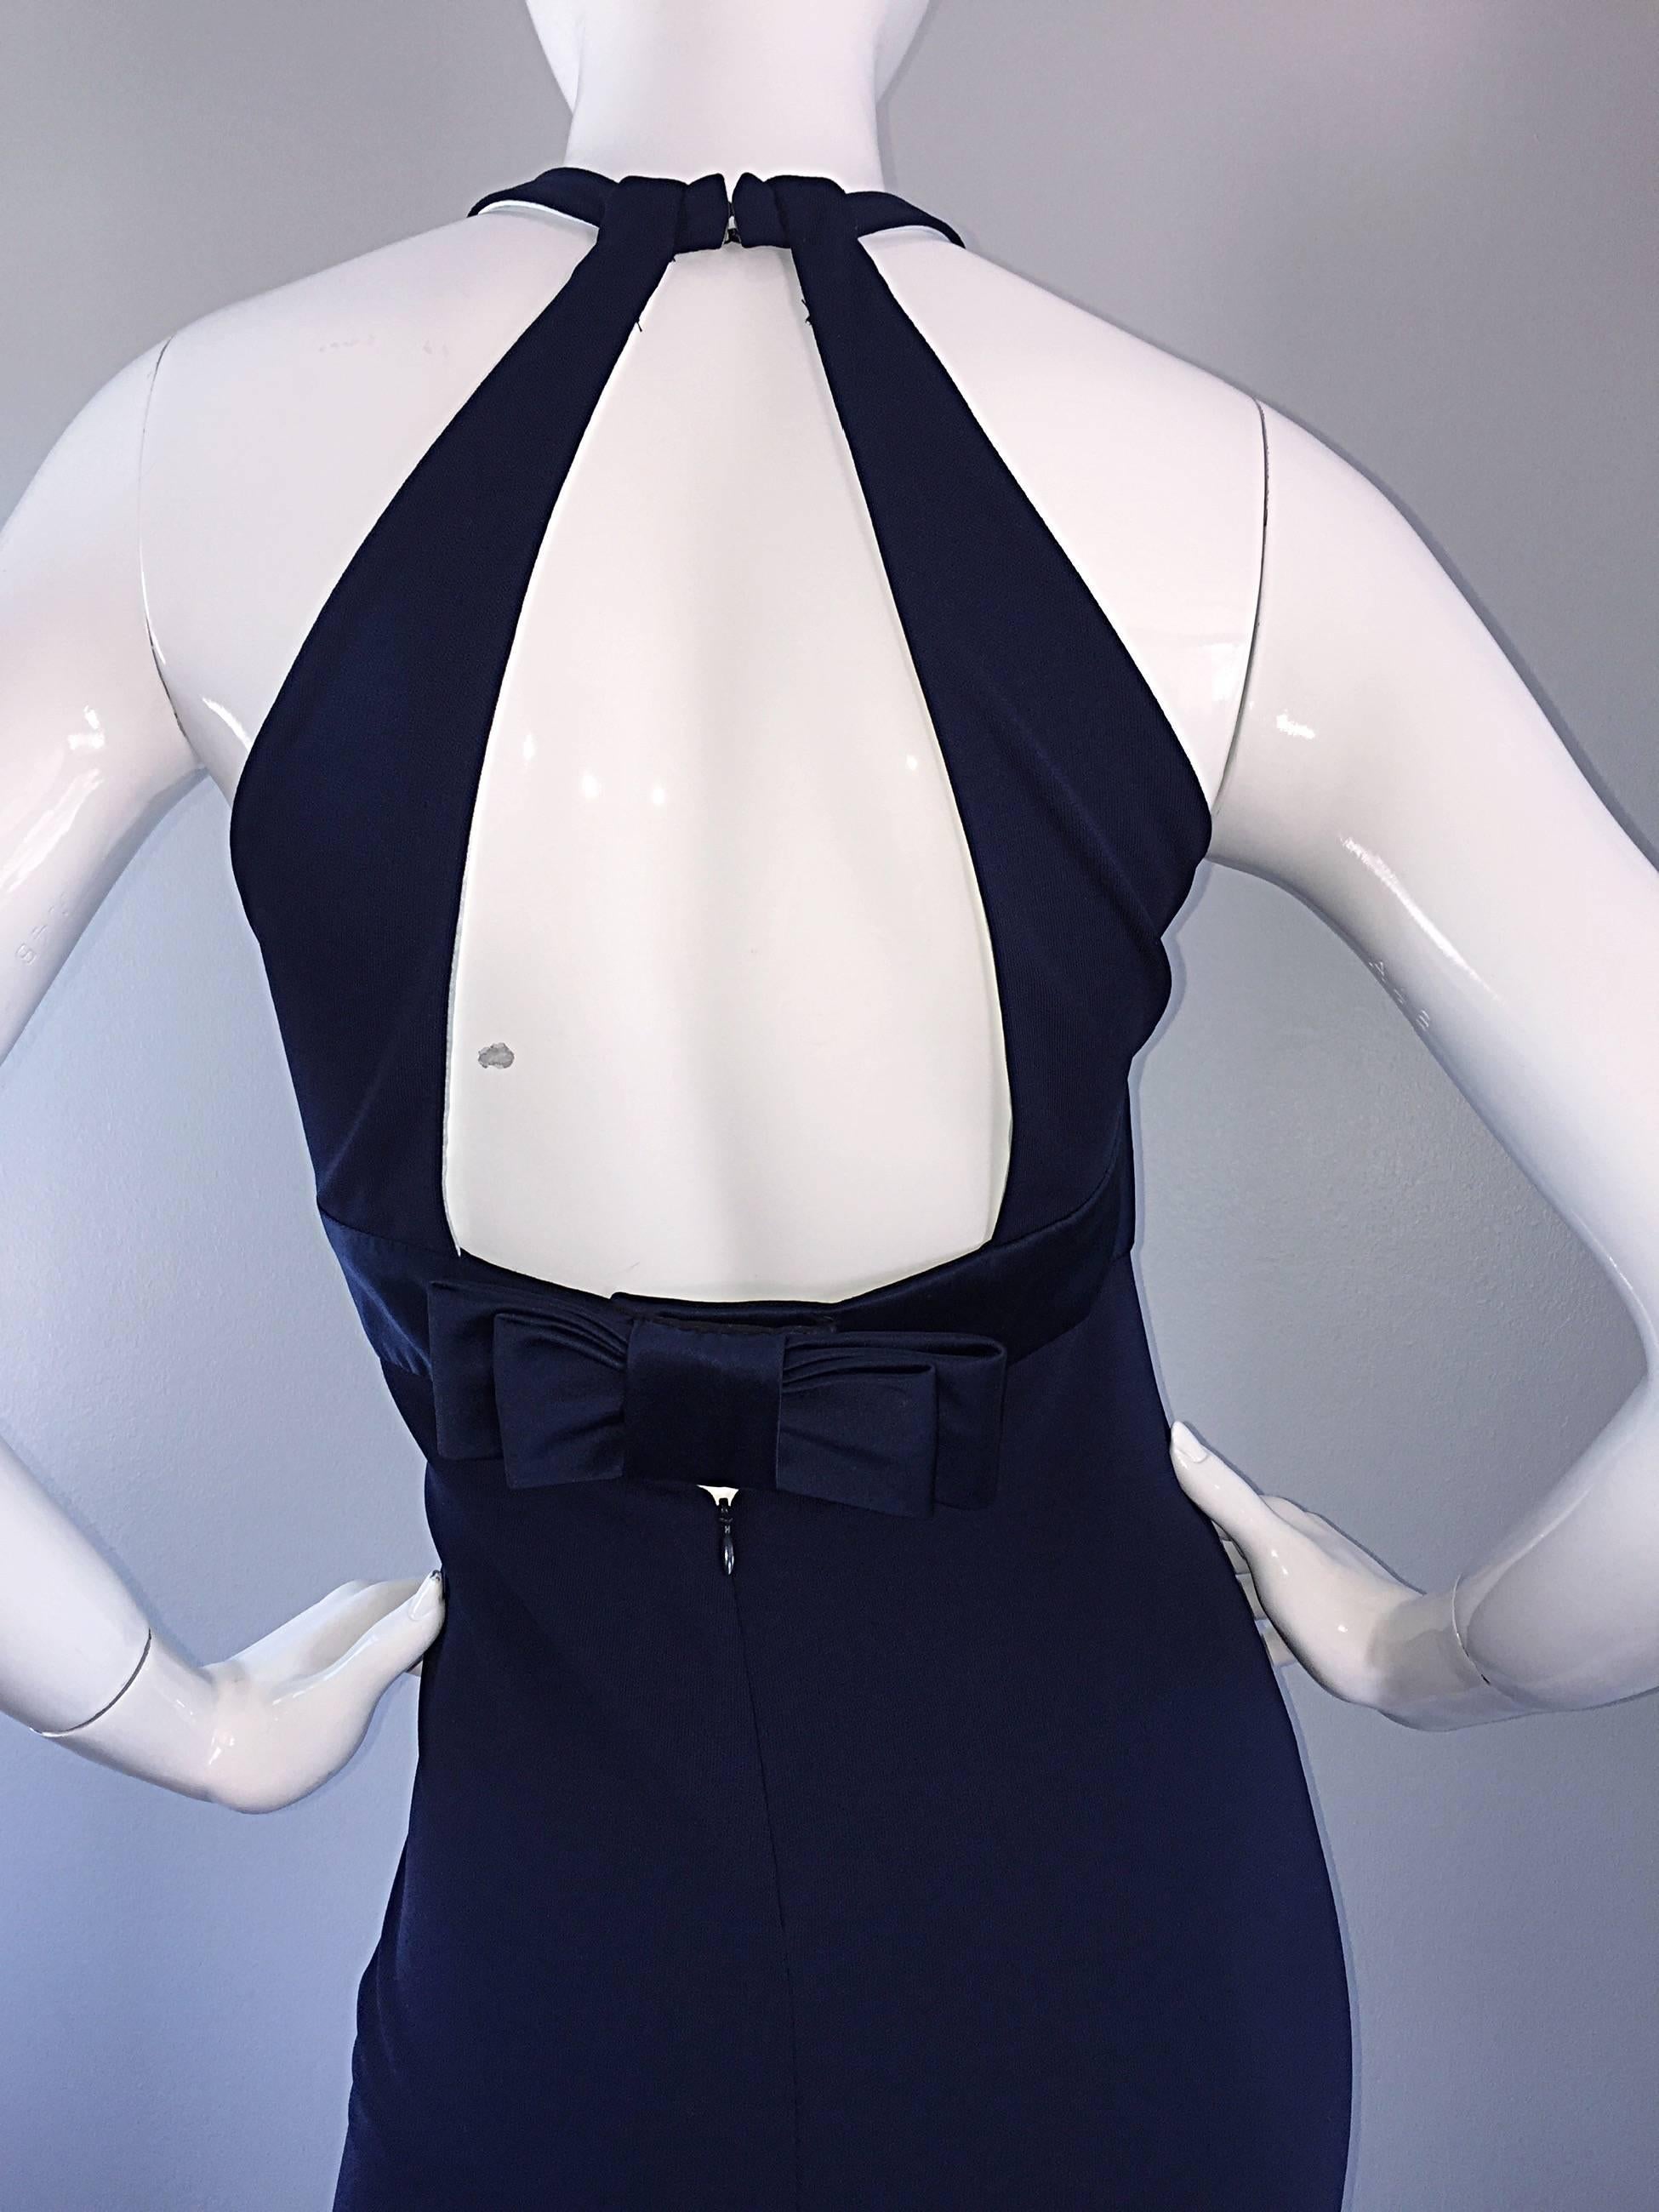 CD Greene Couture 2000s Navy Blue Silk Jersey Paillette Mermaid Dress In Excellent Condition For Sale In San Diego, CA